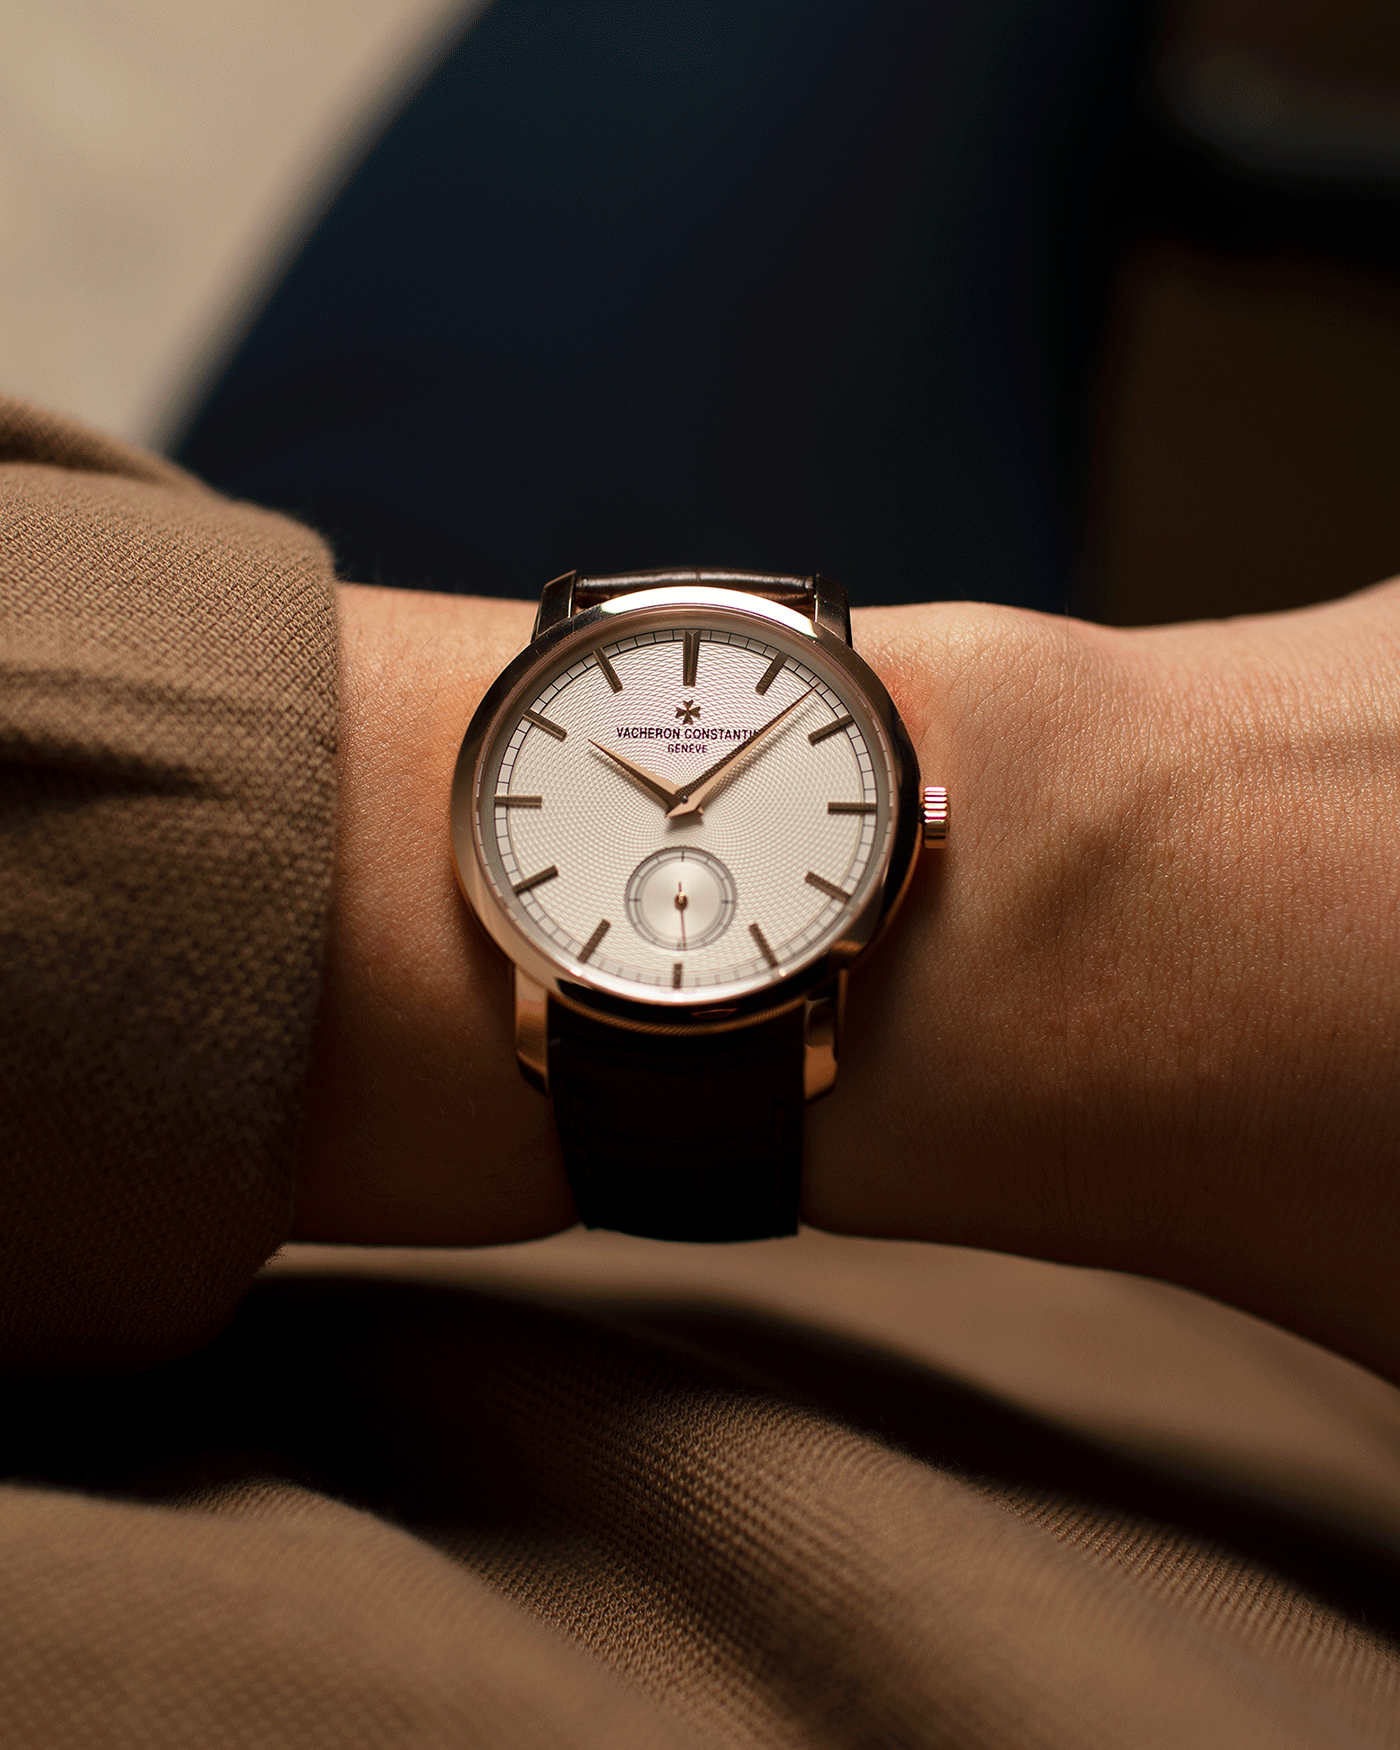 Brand: Vacheron Constantin Year: 2018 Model: Traditionelle Boutique Edition Reference Number: 82172 Material: 18k Rose Gold Movement: Manually-Wound In-House Cal. 4400AS Case Diameter: 38mm Bracelet/Strap: Vacheron Constantin Dark Brown Alligator Strap with 18k Rose Gold Tang Buckle